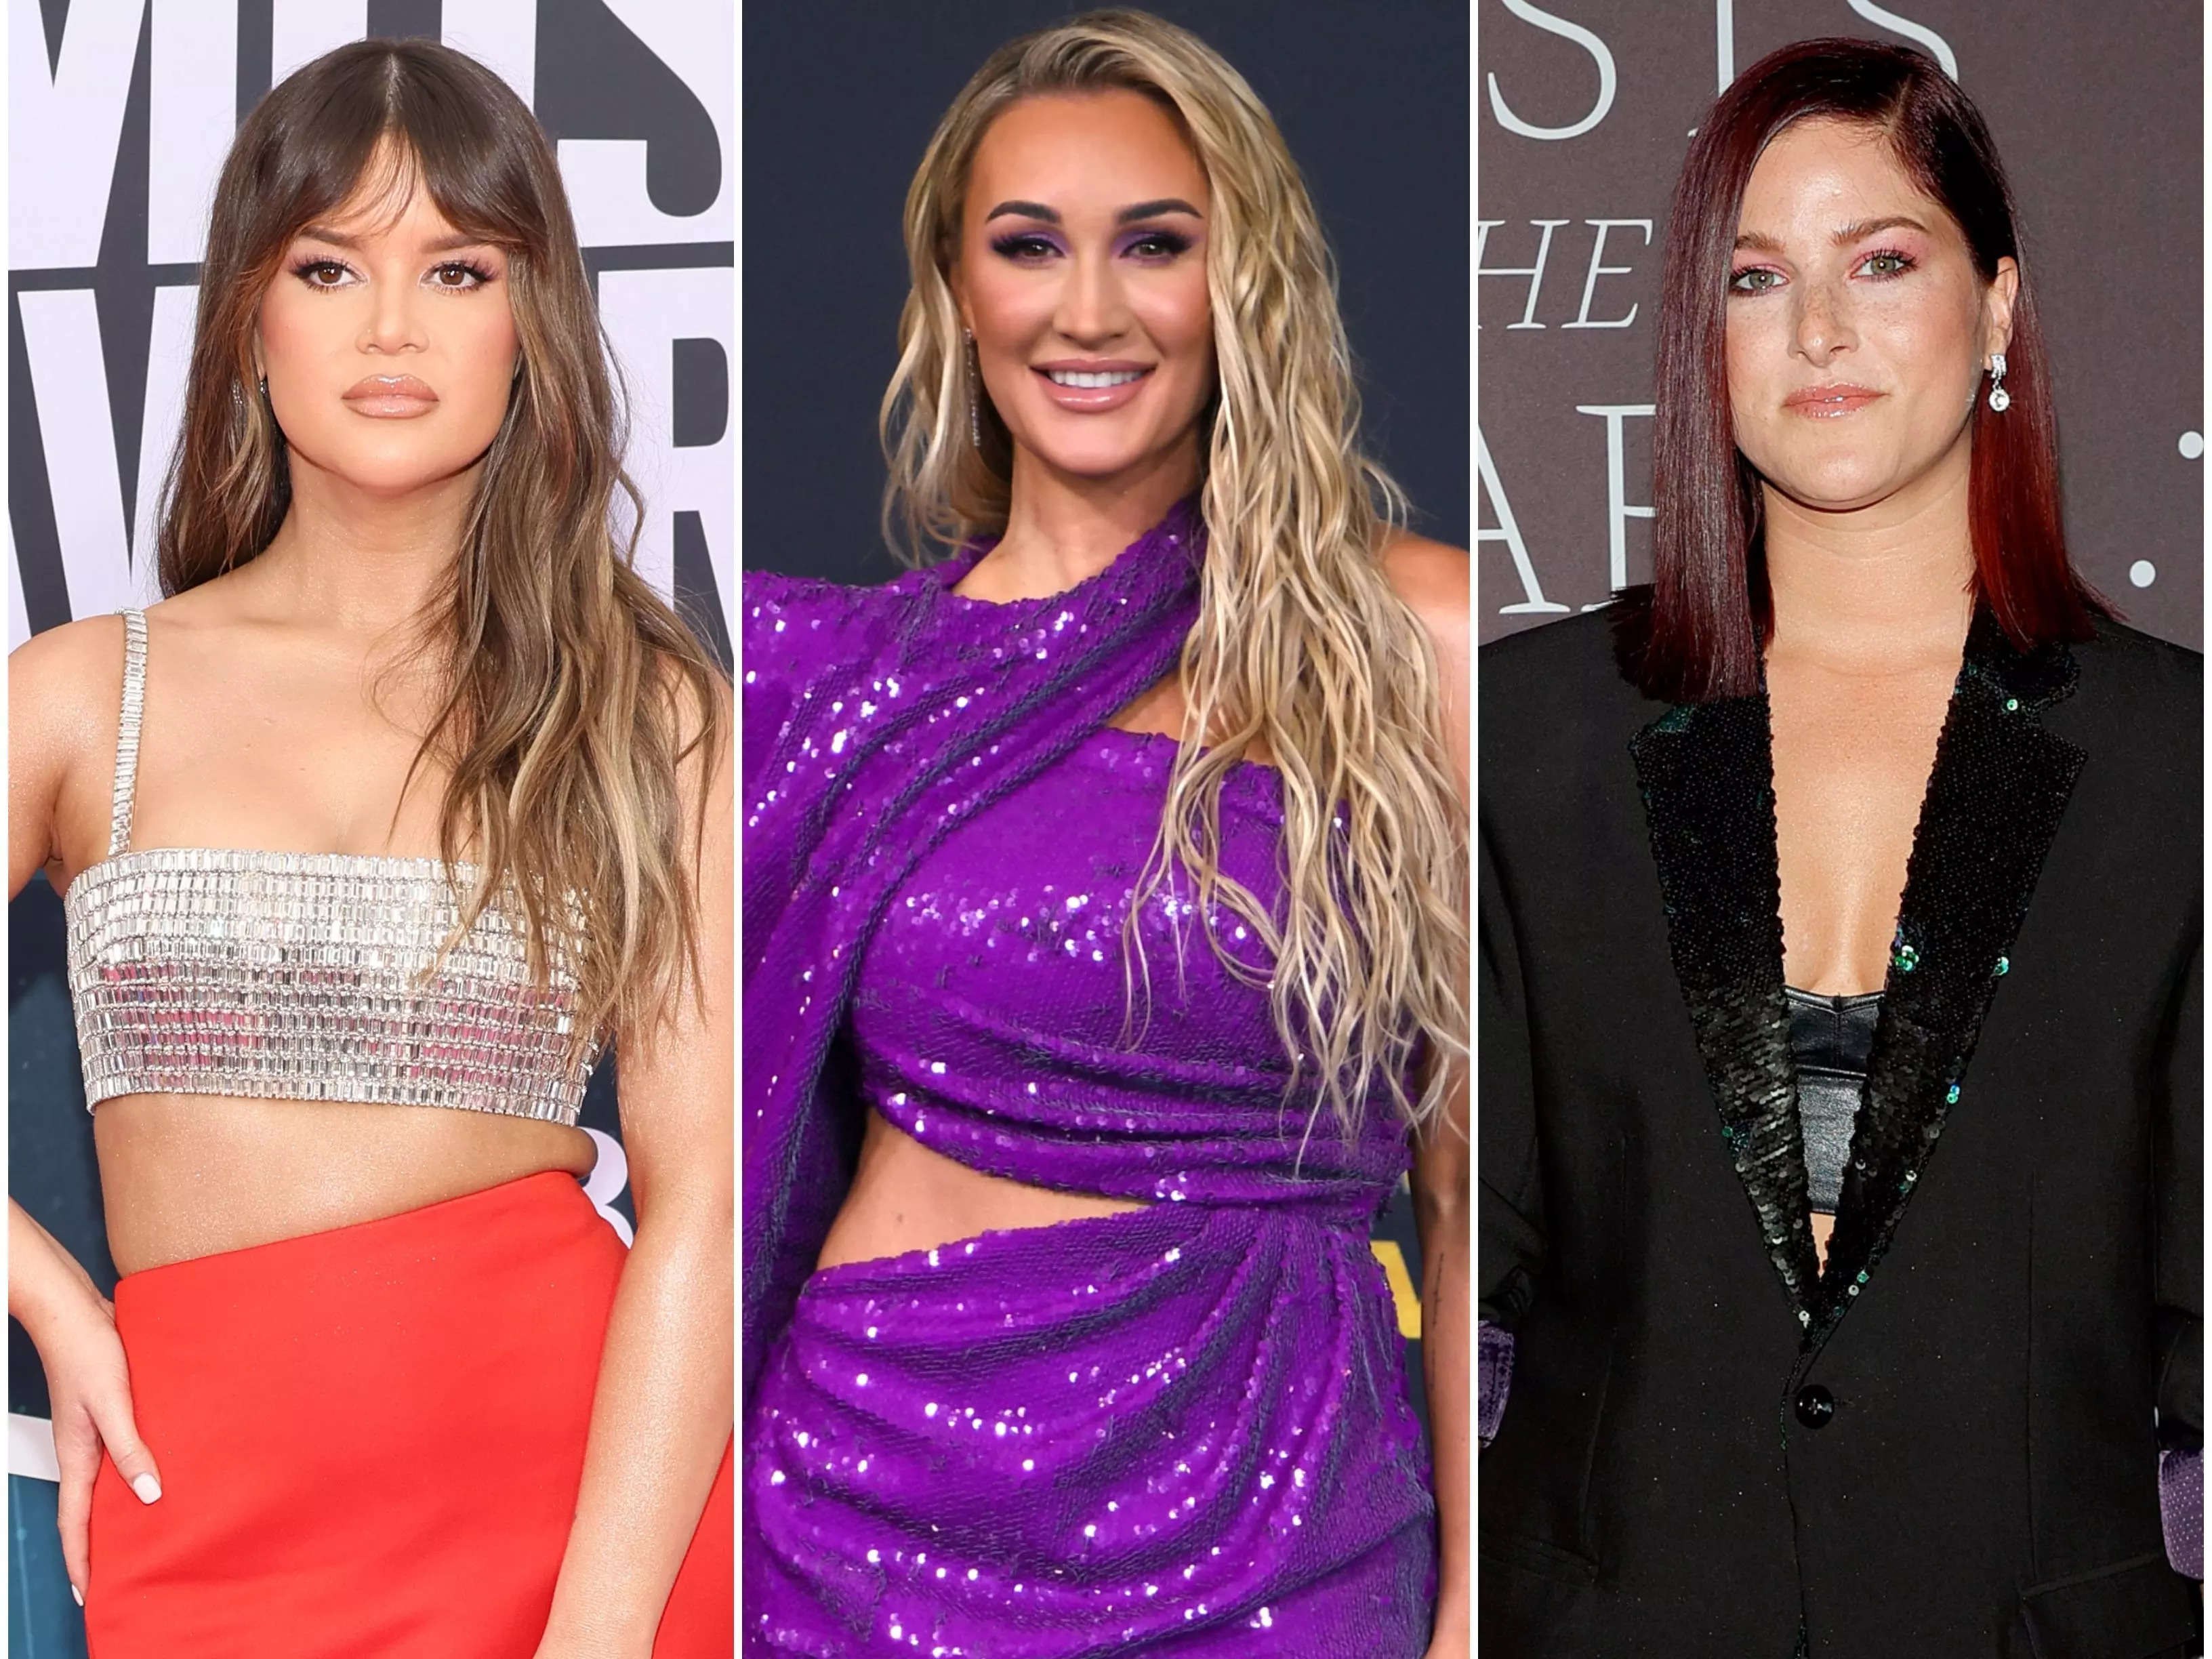 businessinsider.in Country stars Maren Morris and Cassadee Pope call out Ja...